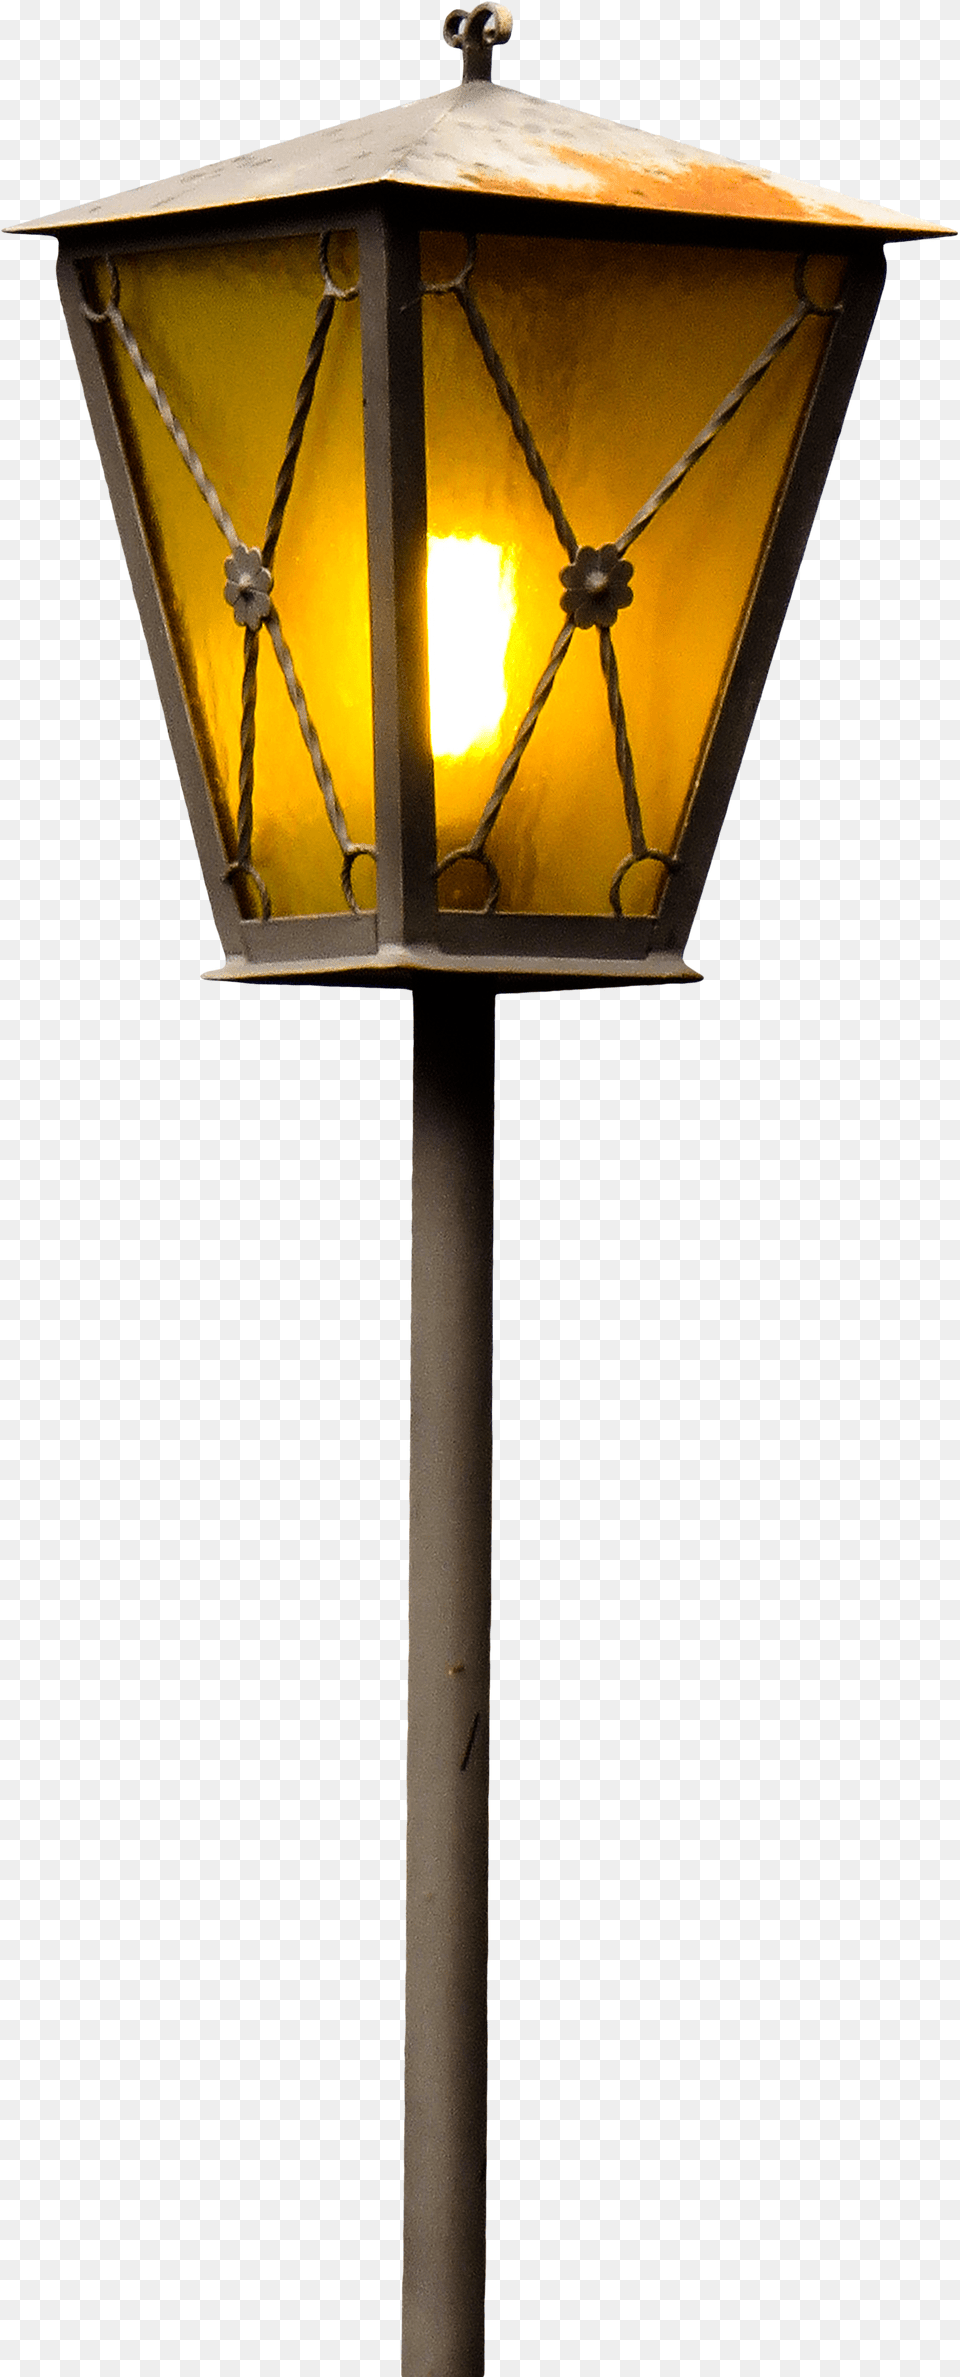 Old Street Lamp Image Light For Picsart, Lampshade Free Transparent Png